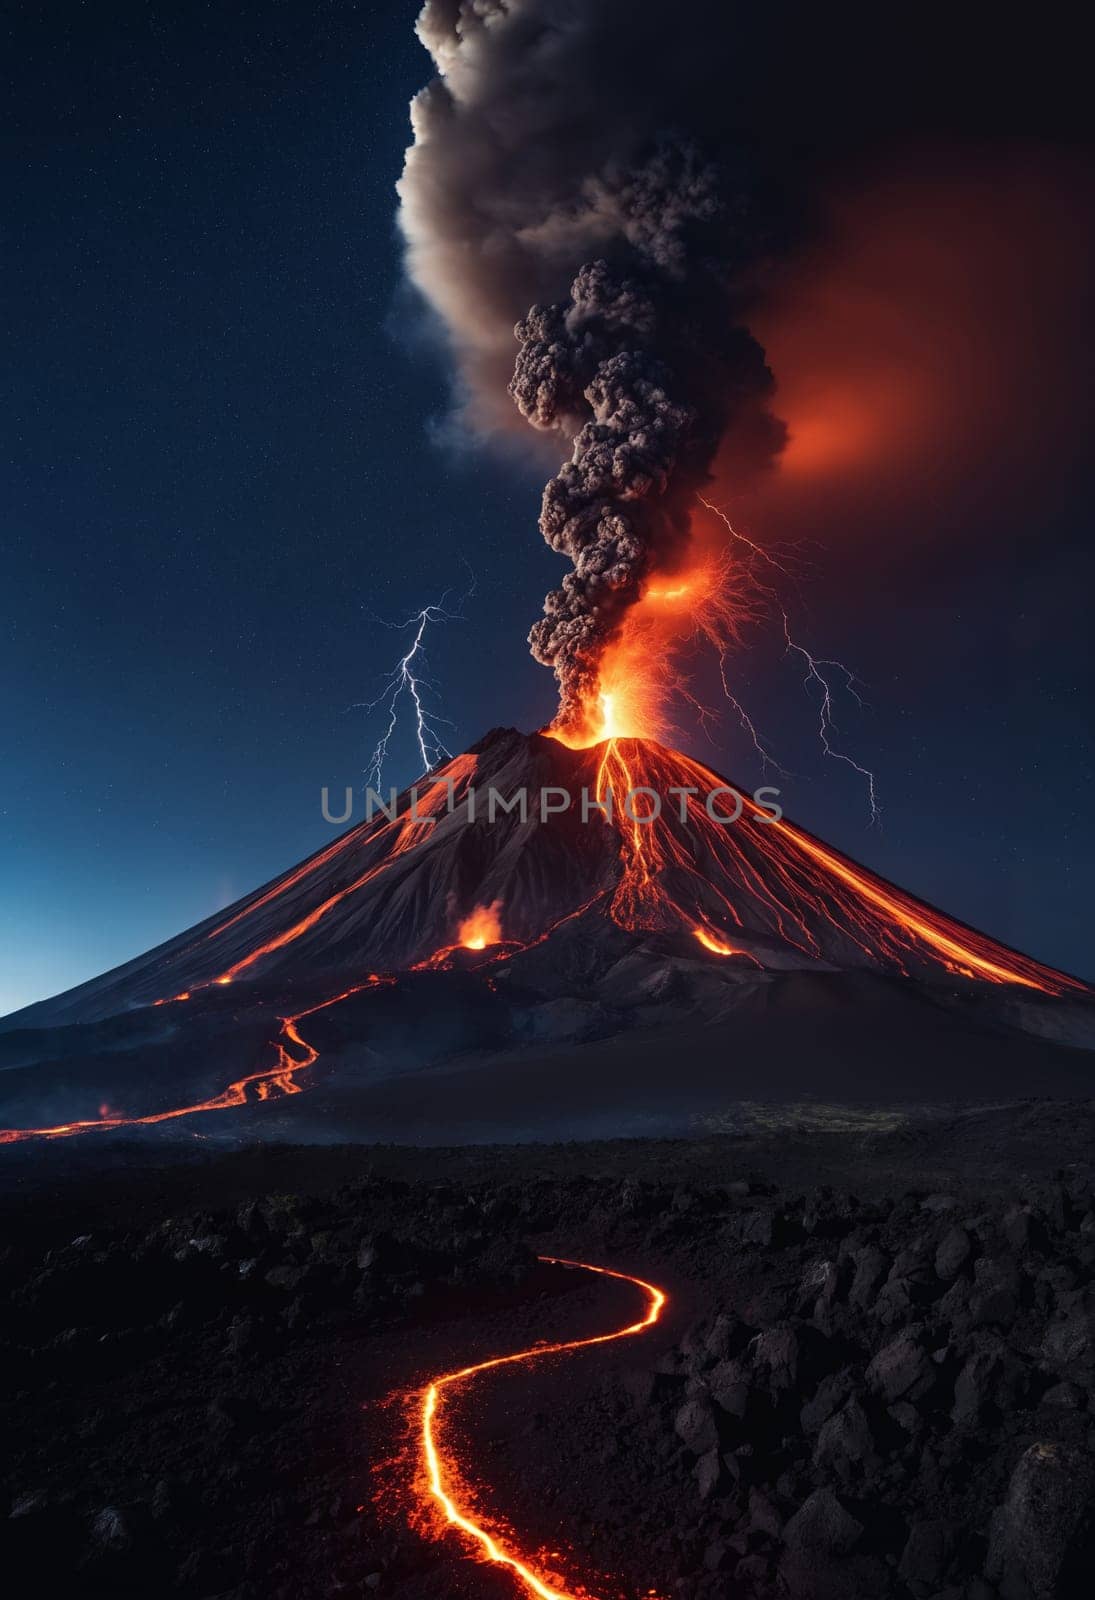 Strong volcanic eruption at night.